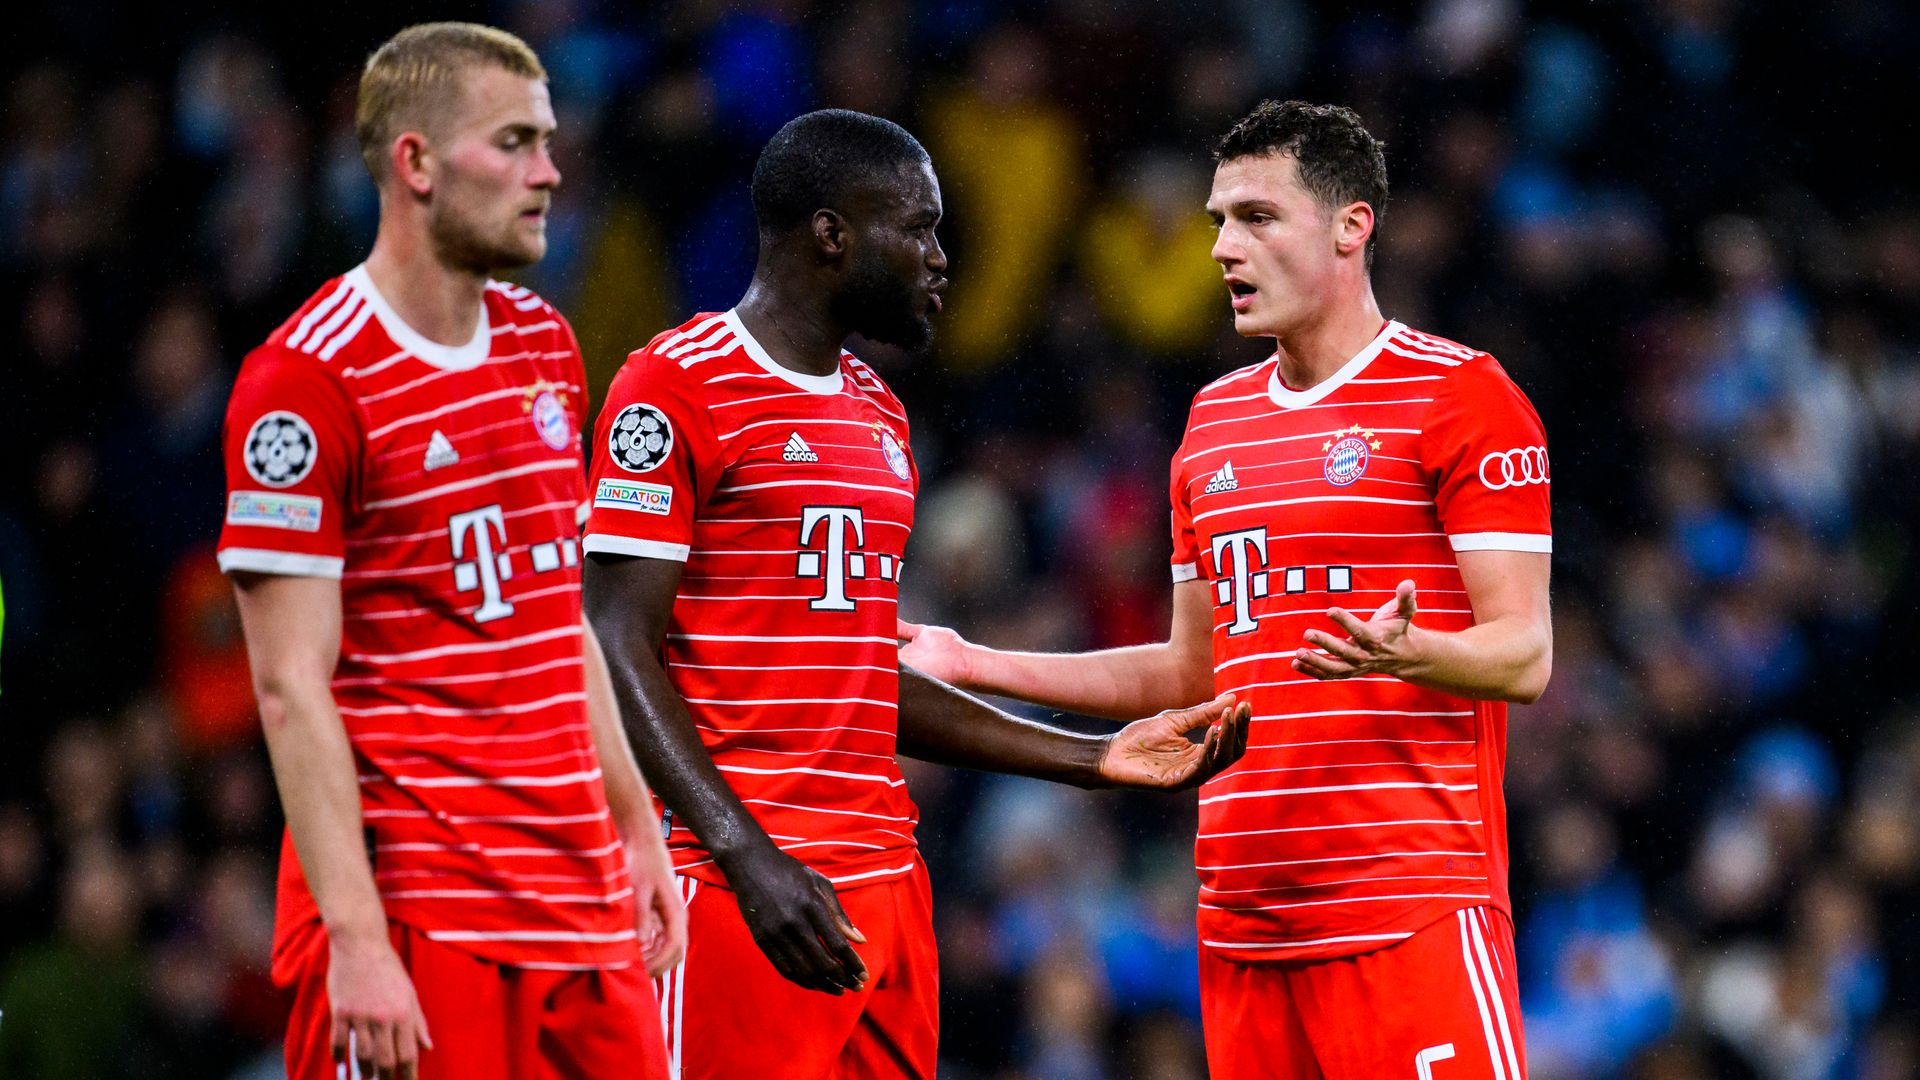 Man City-Bayern ratings: Dias imperious as Upamecano has night to forget